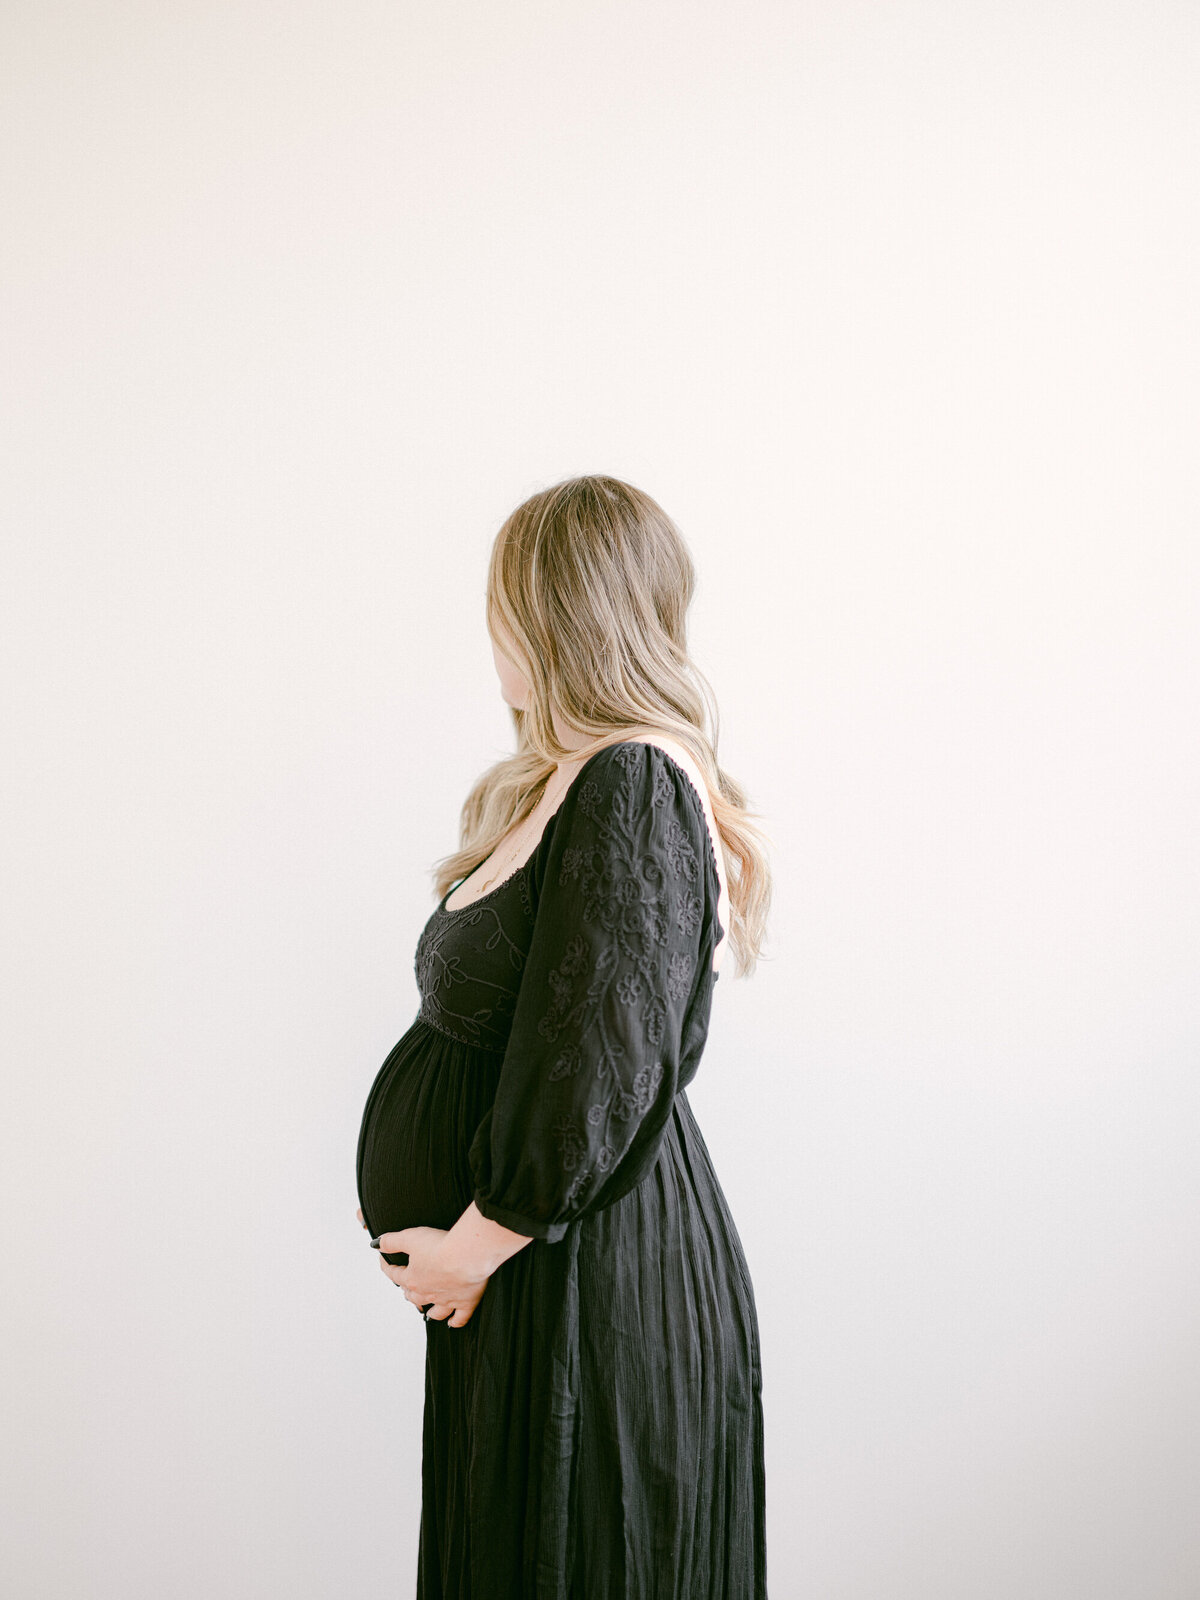 ct-maternity-session-photo-rental-studio-the-apiary-co-2